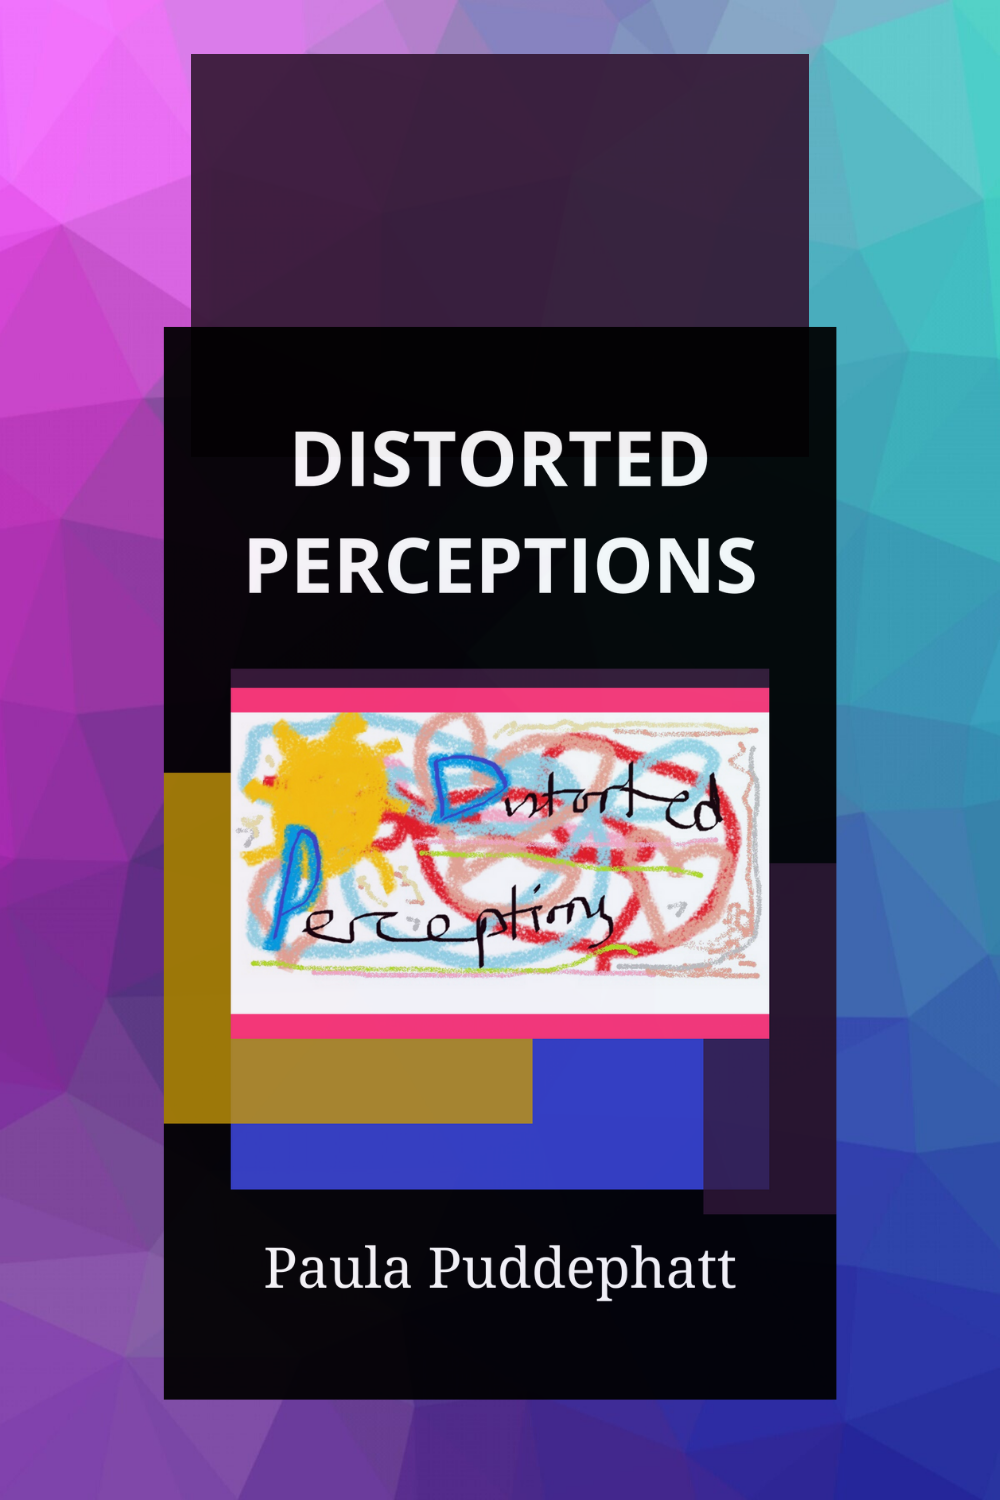 about-distorted-perceptions-the-novel